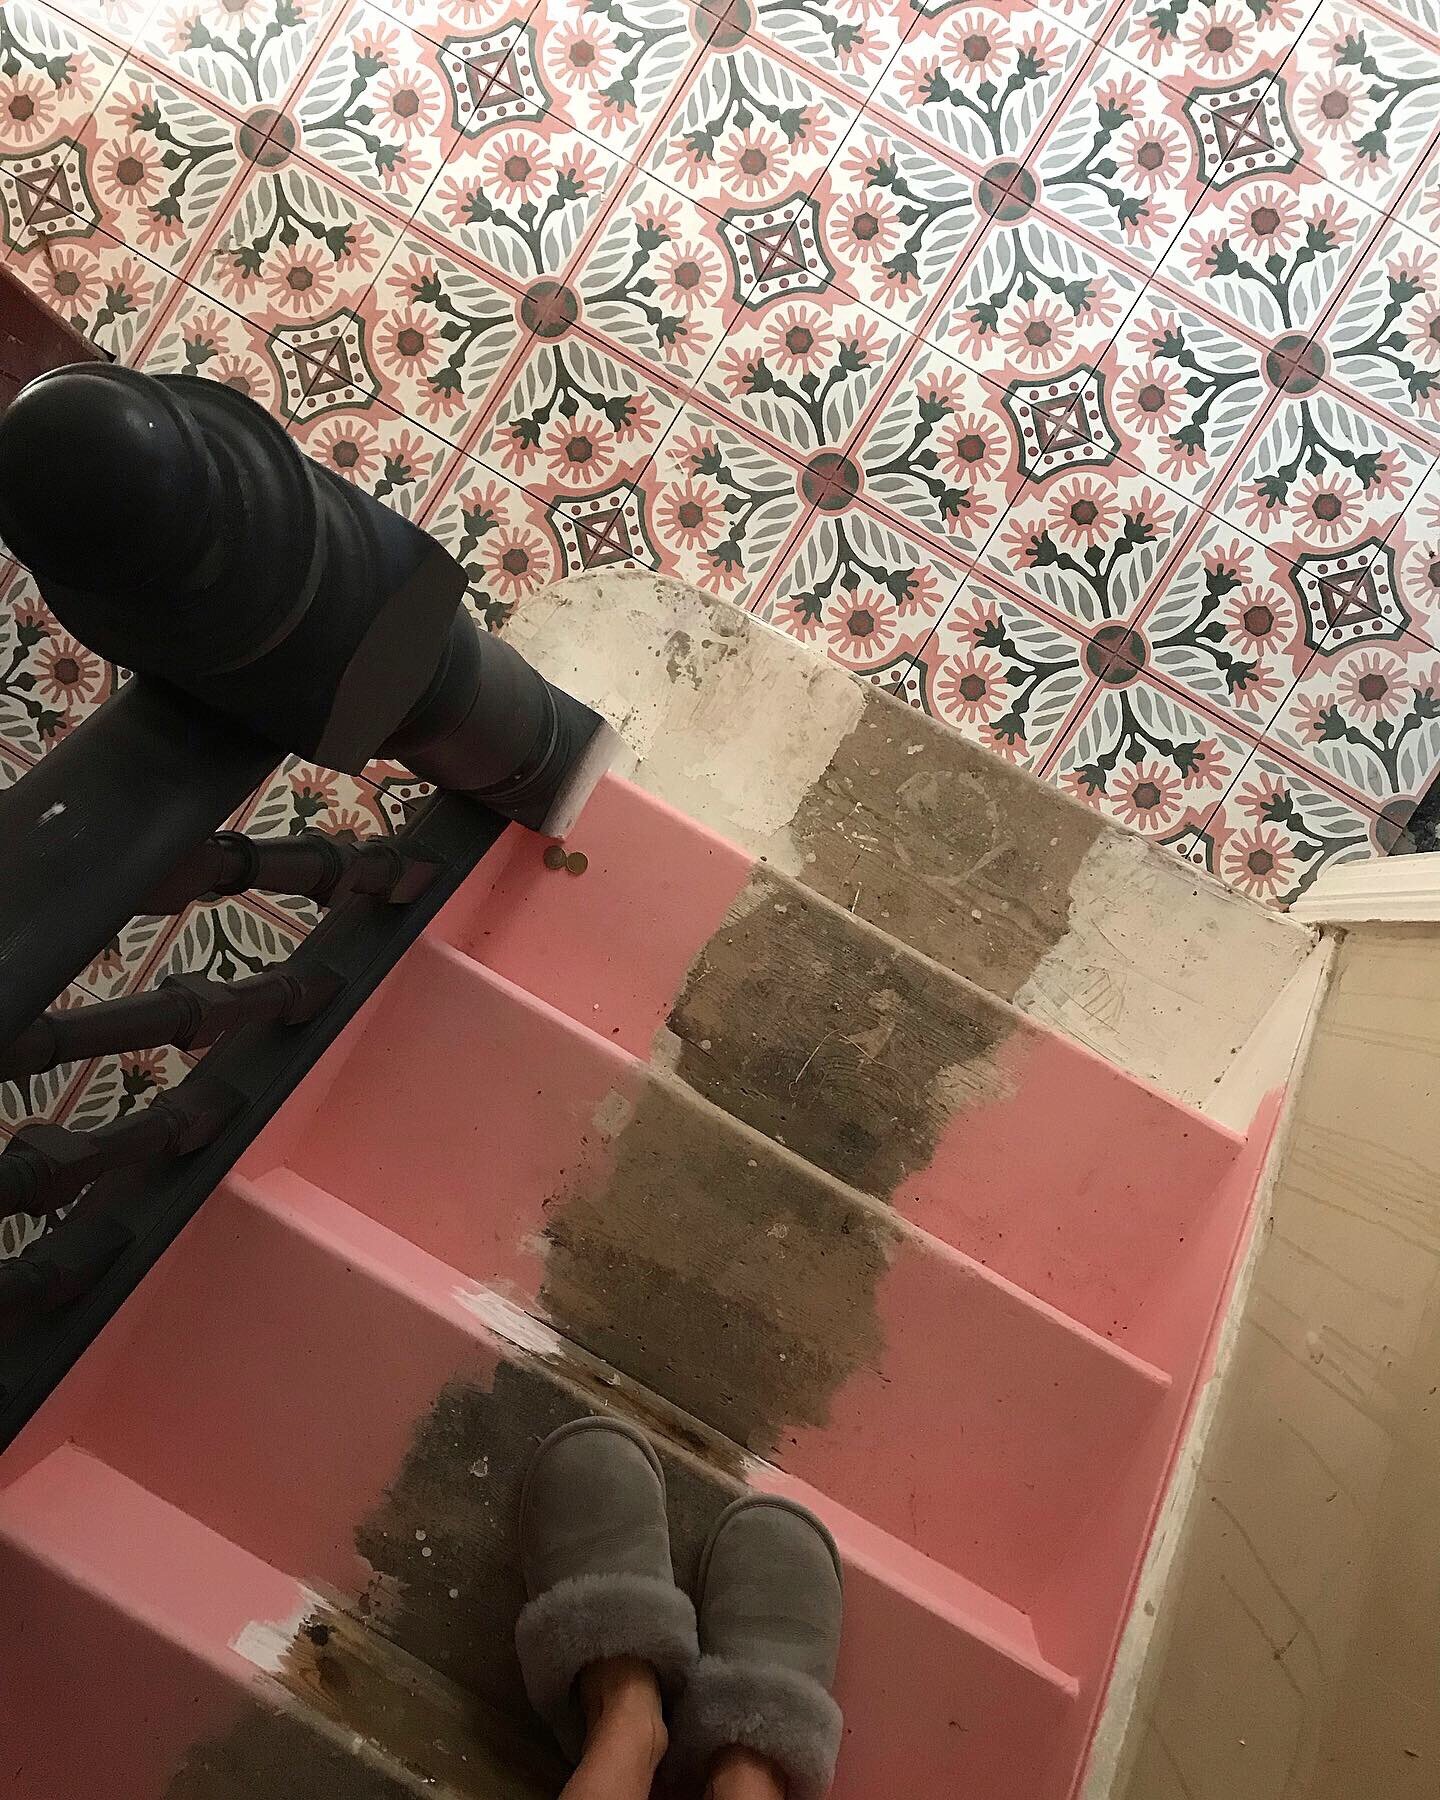 A work-in-progress snap of my mid-renovation hallway and stairs/Tiles are Sakura from Otto Tiles, stairs painted in soon-to-go-on-sale Pink House from Mylands